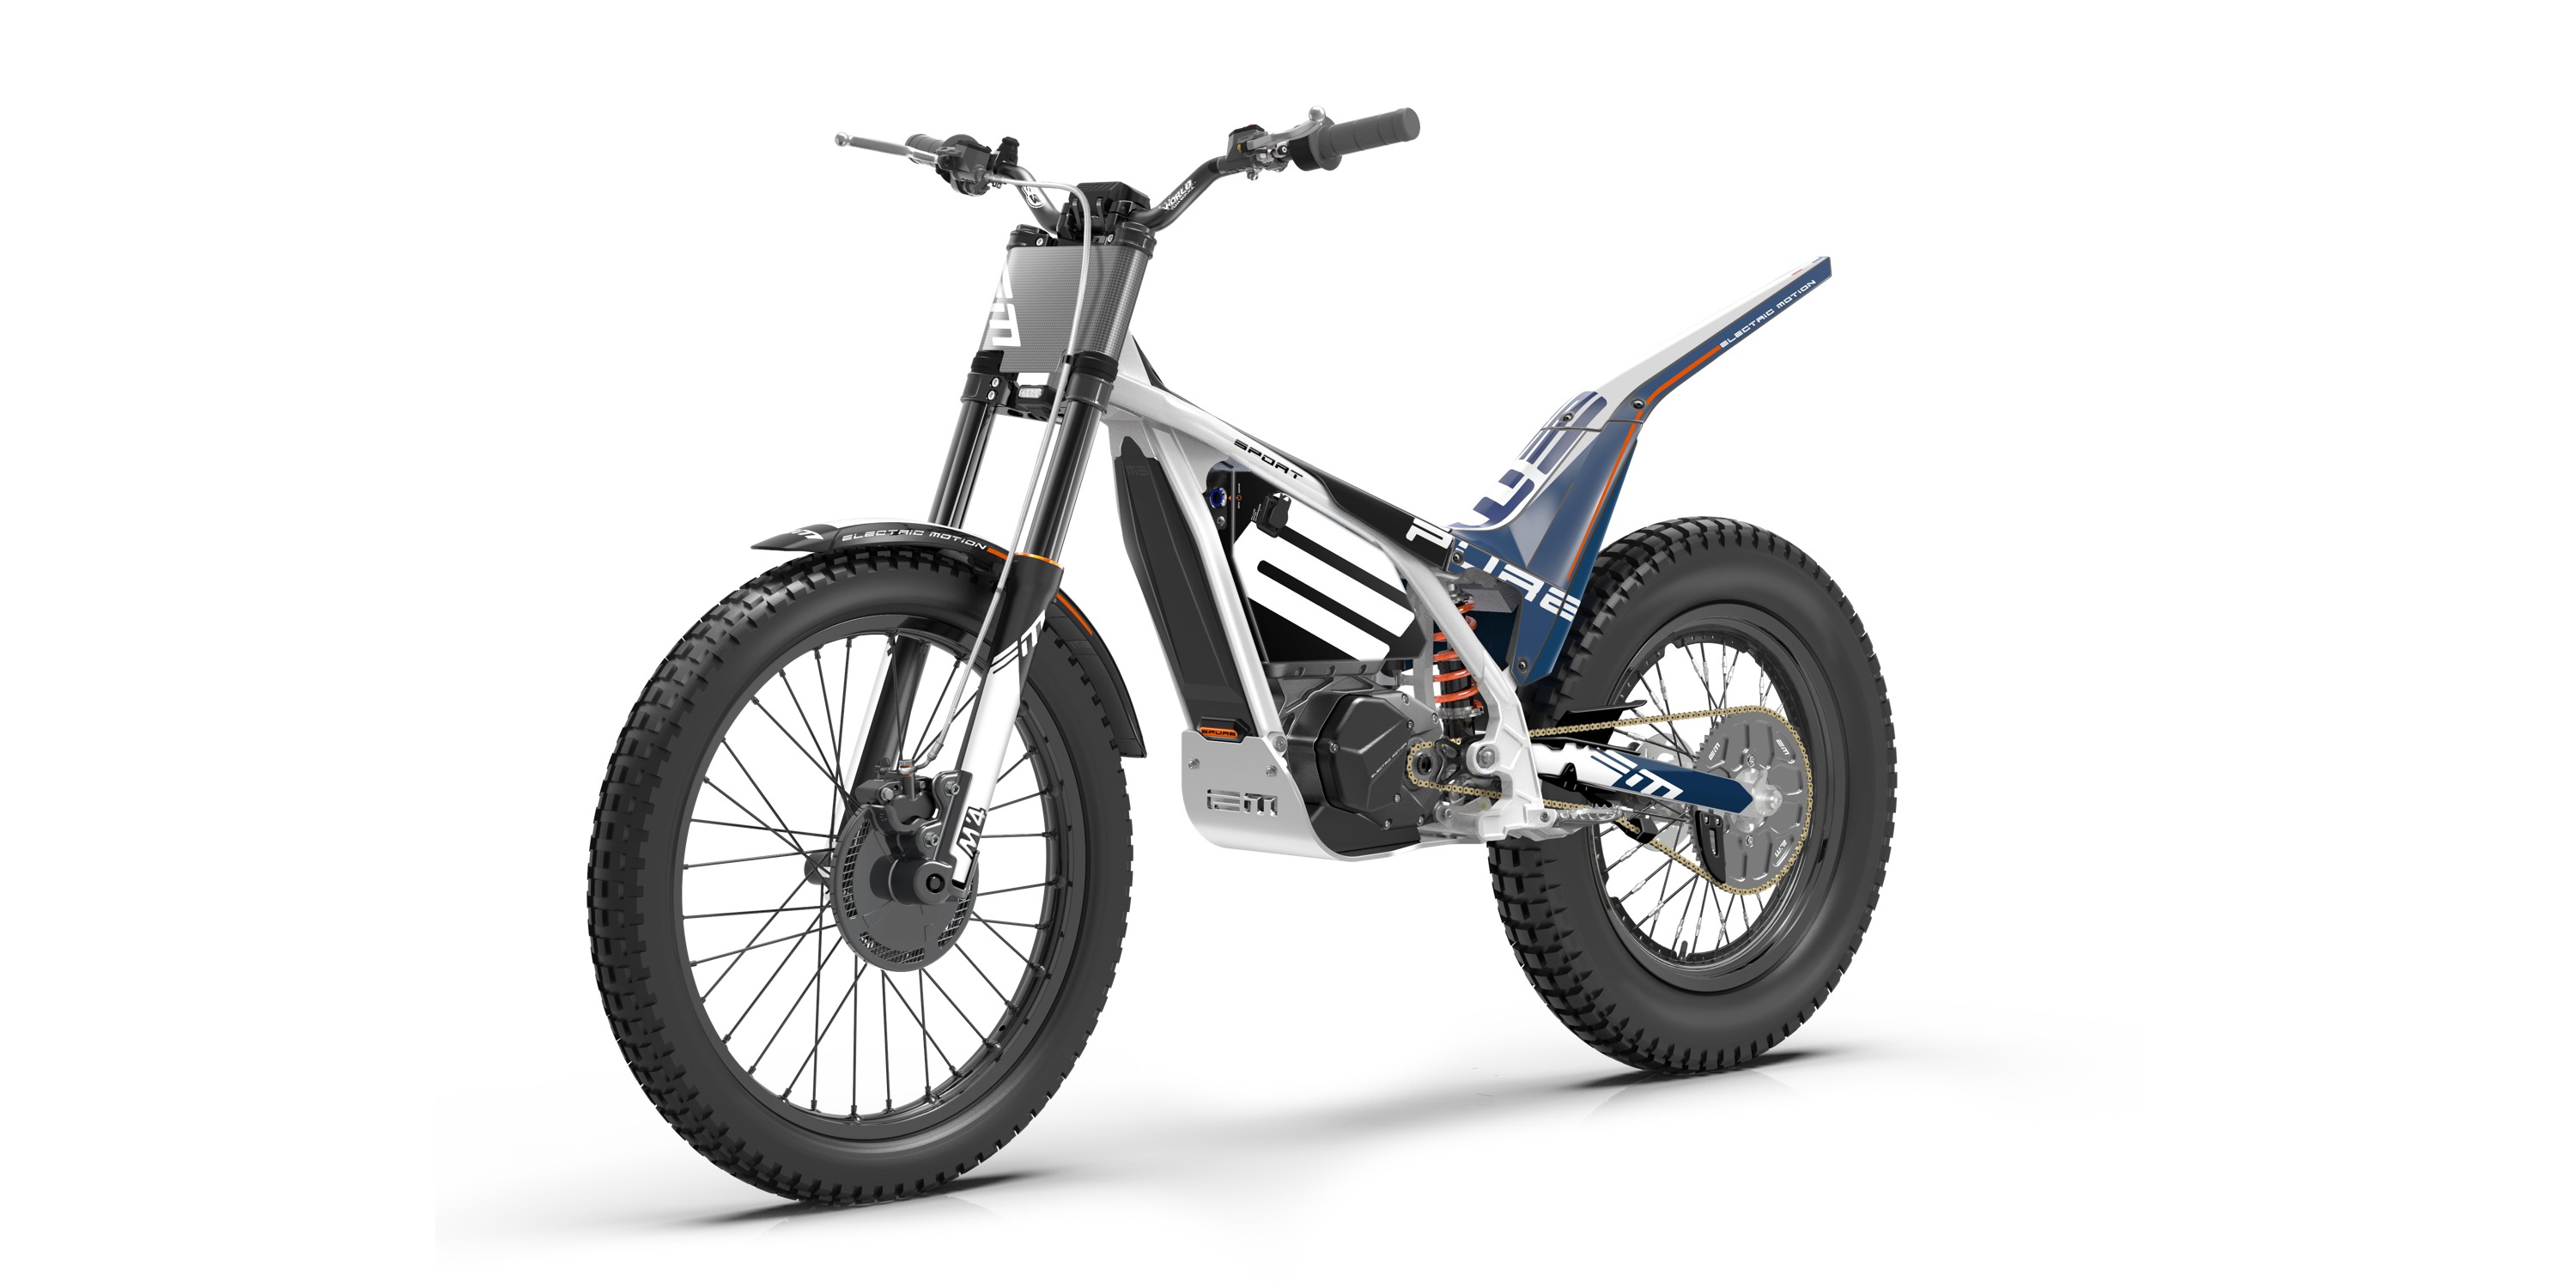 trials bikes for sale usa